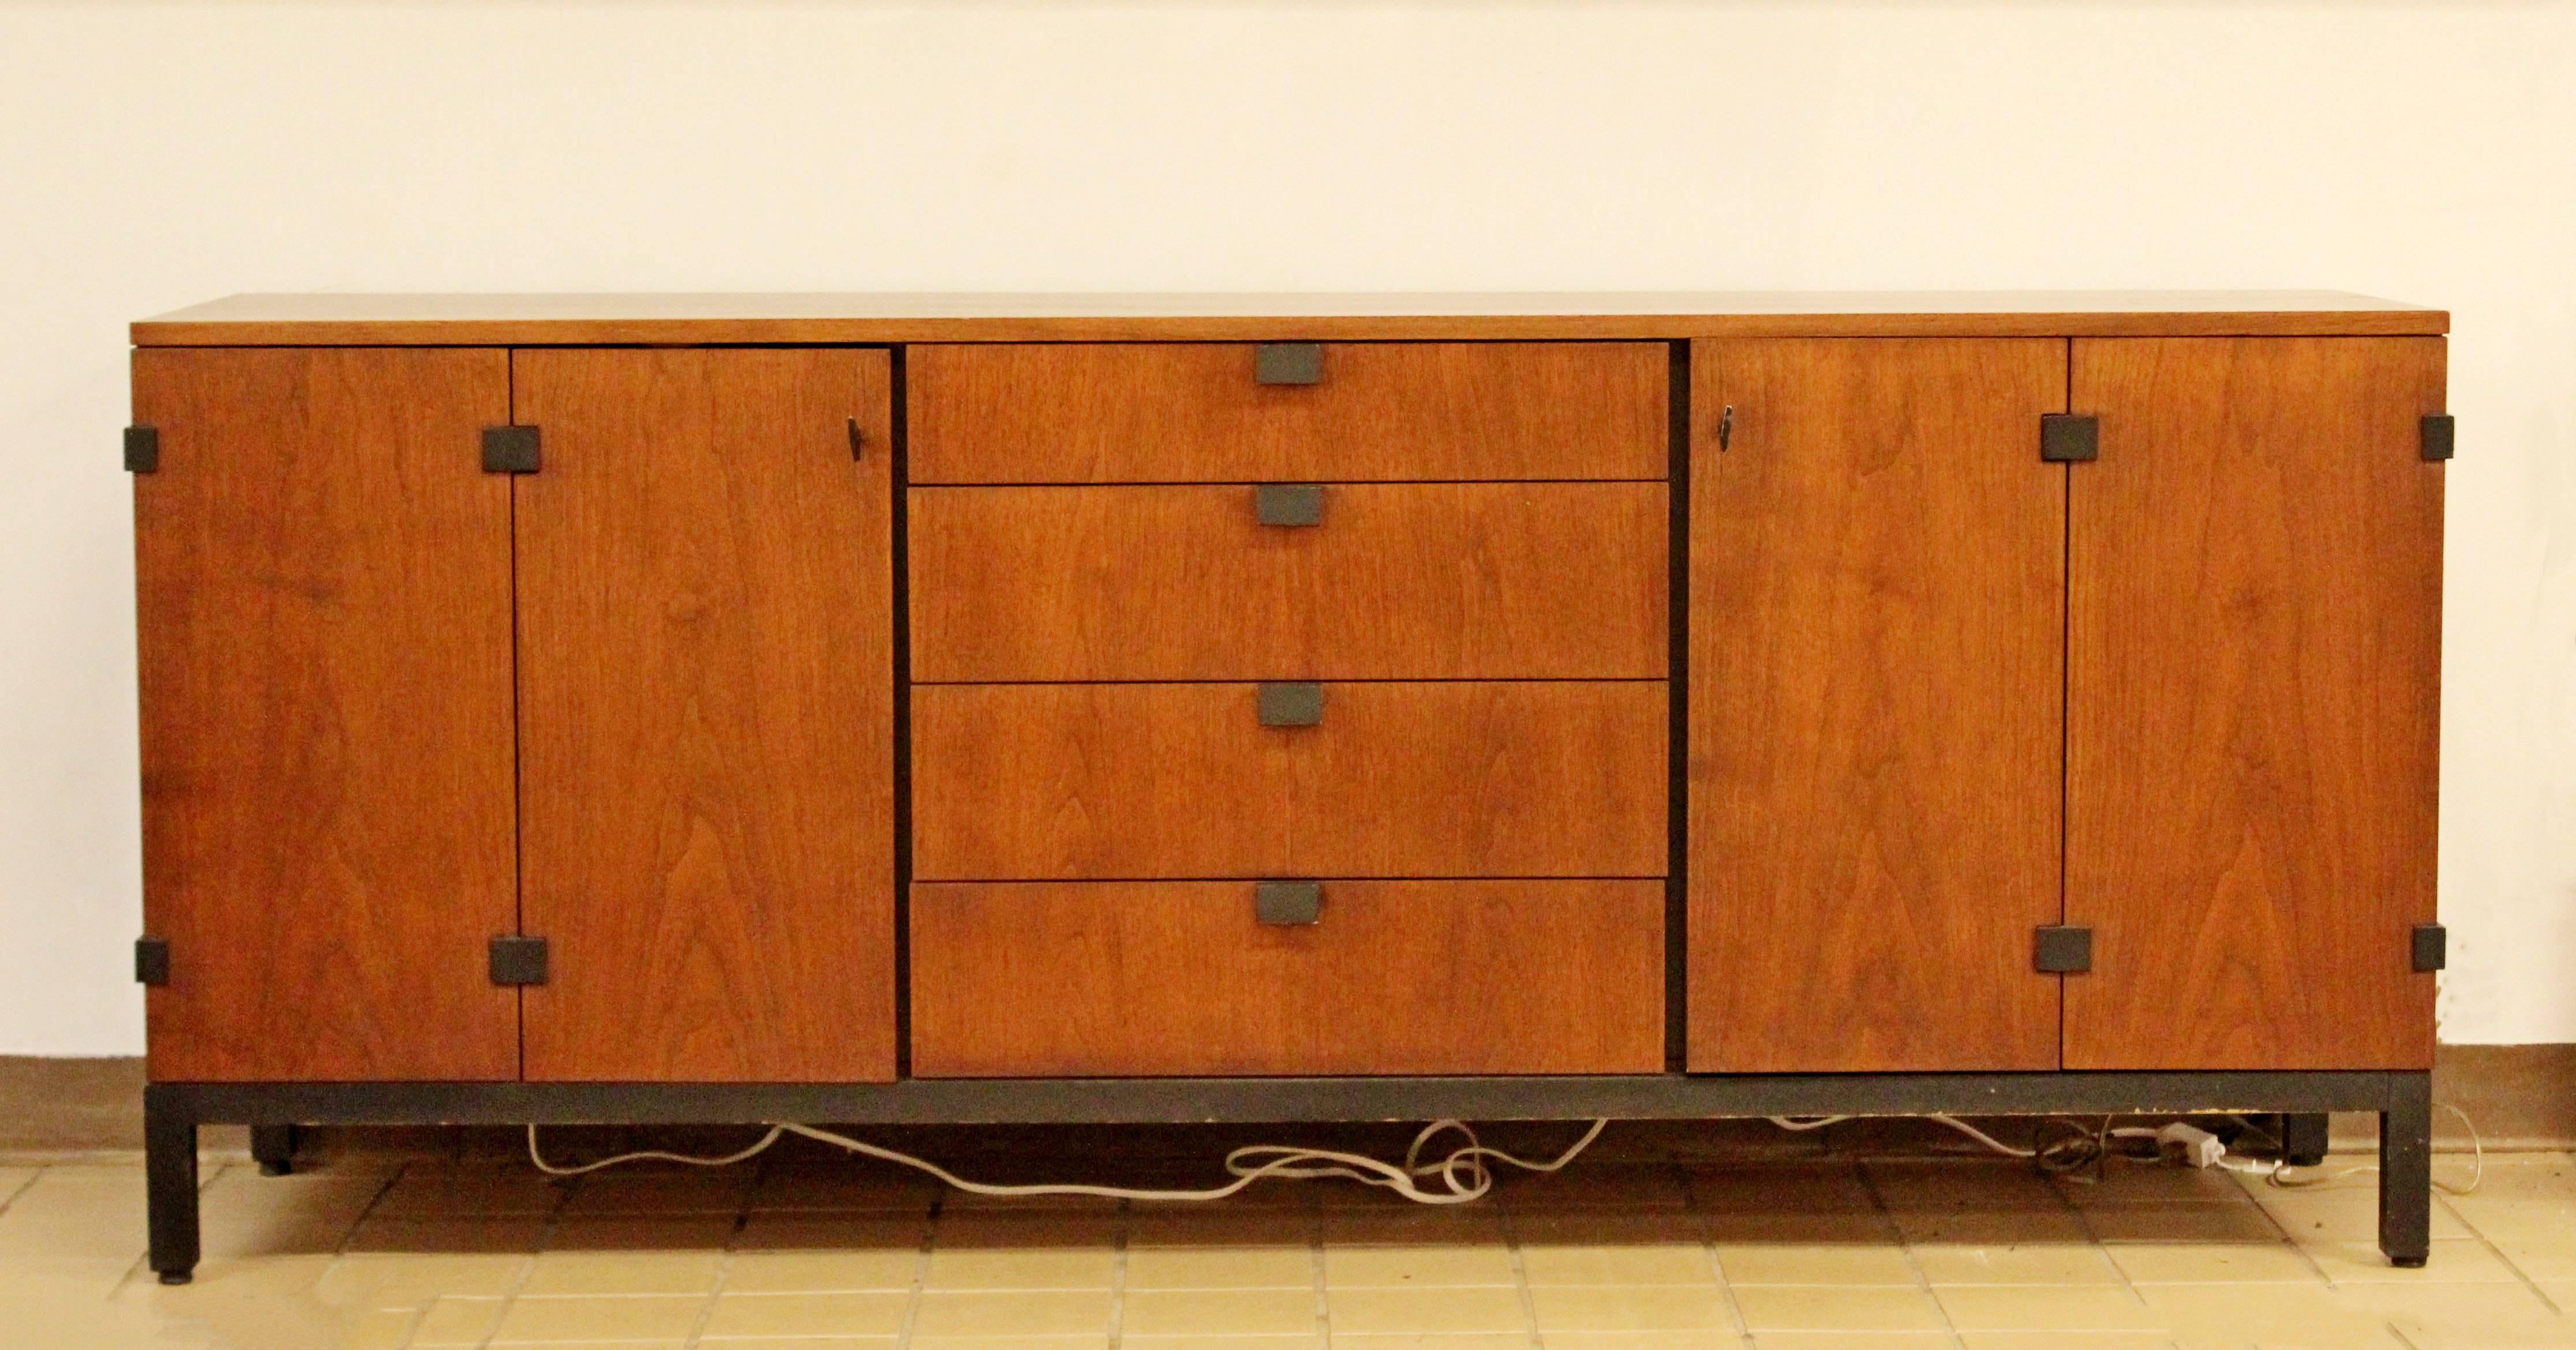 For your consideration is a gorgeous, walnut credenza, with four drawers and two storage spaces, by Kipp Stewart for Directional, circa the 1950s. In excellent condition. The dimensions are 72